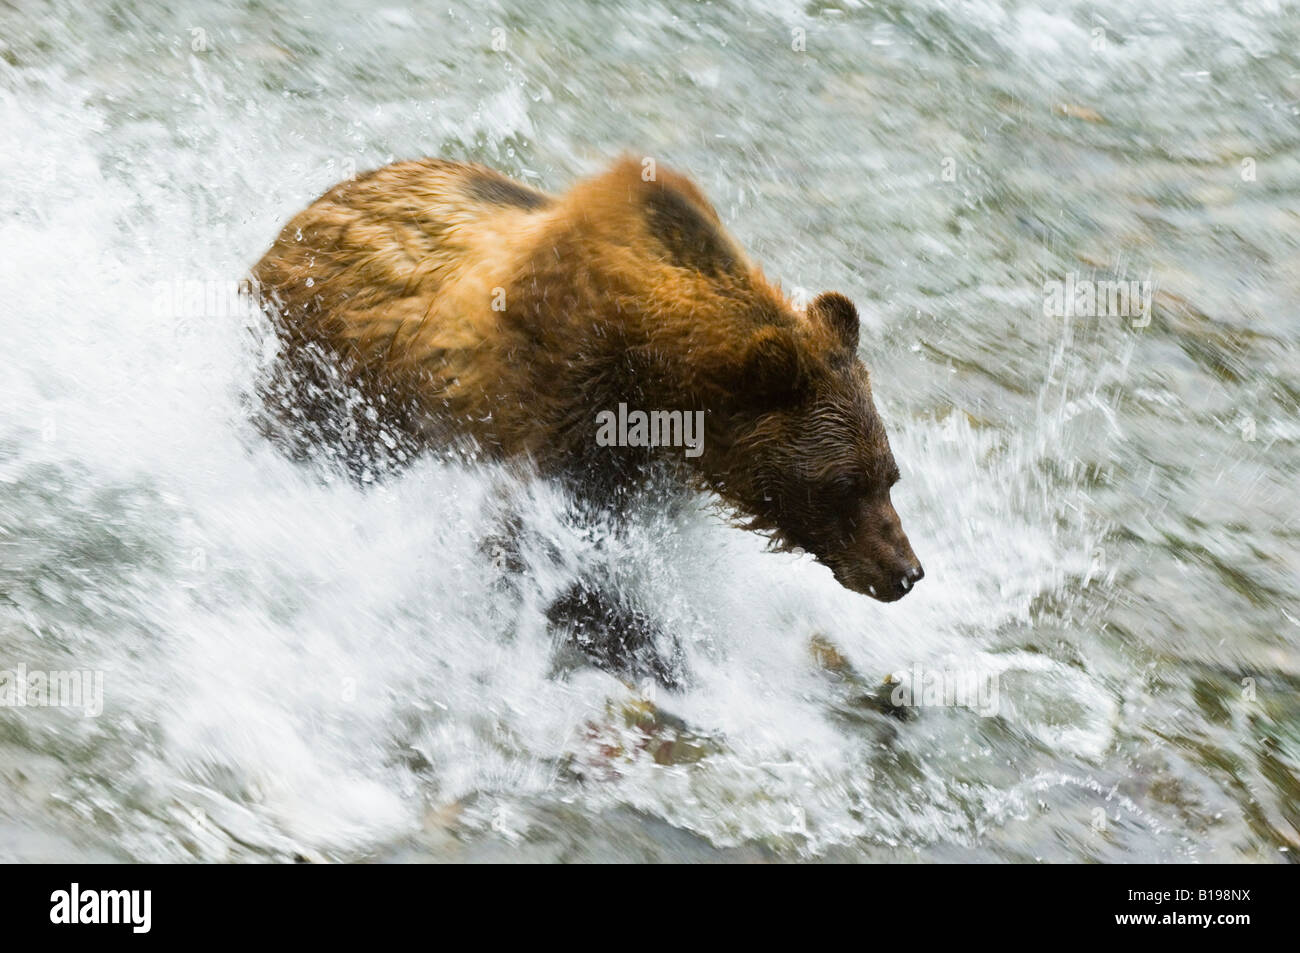 Grizzly Bear (Ursus arctos) chasing salmon in Fish Creek Tongass National Park, Alaska, United States of America. Stock Photo